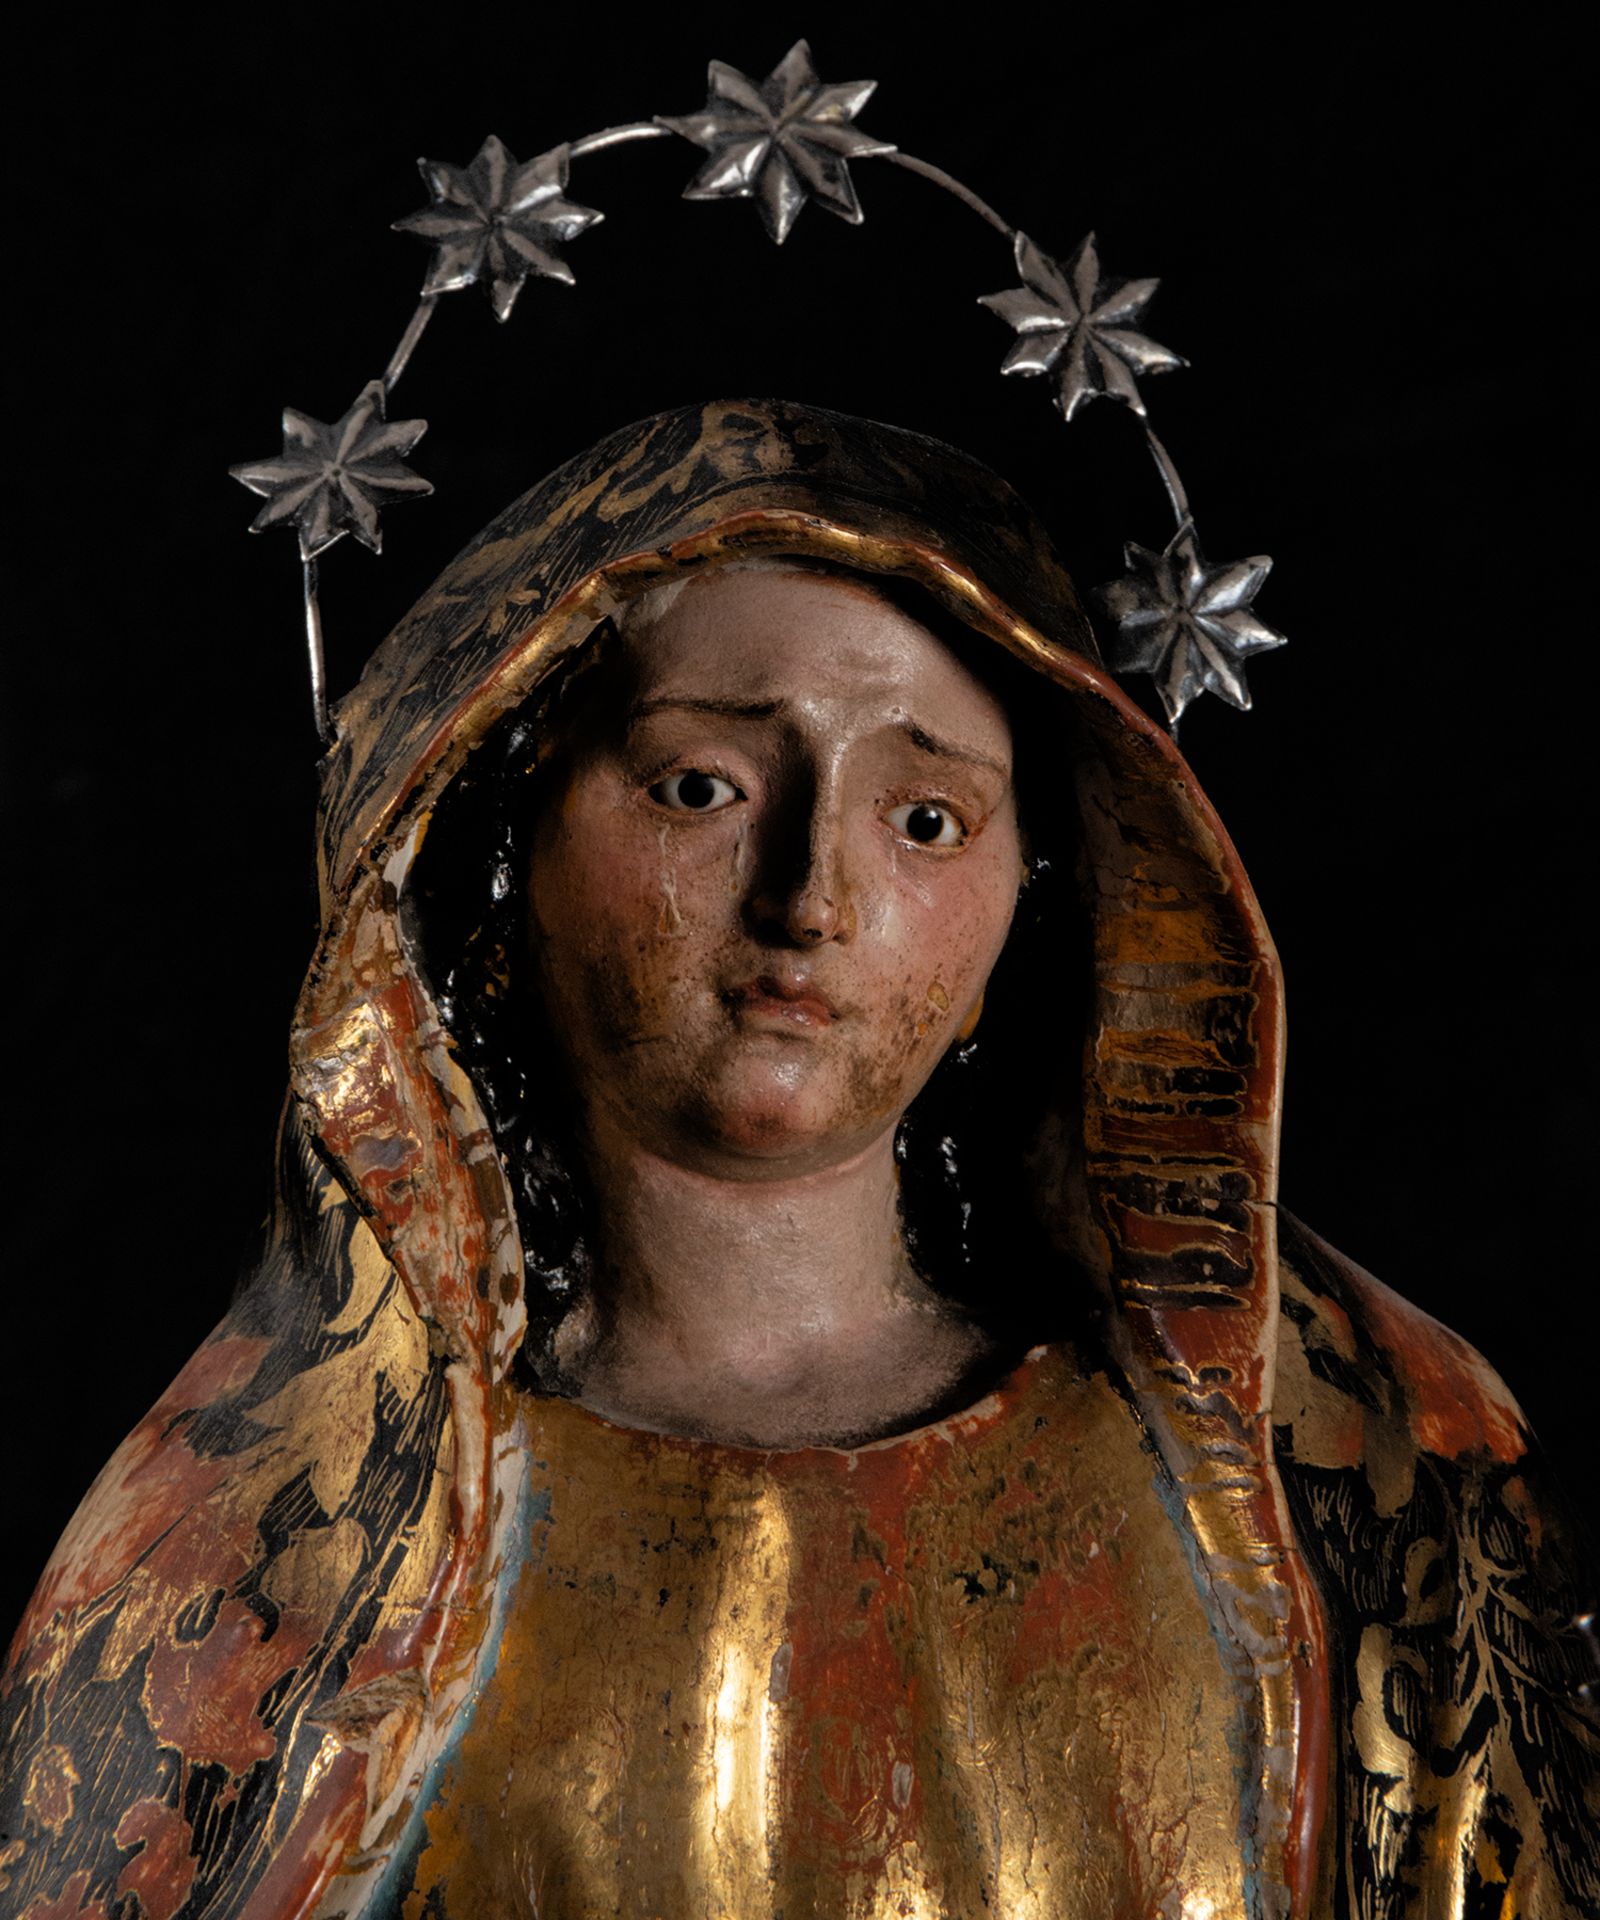 Exceptional Pieta depicting Mary with Christ in her arms, Guatemala, early 18th century Novohisopano - Image 2 of 8